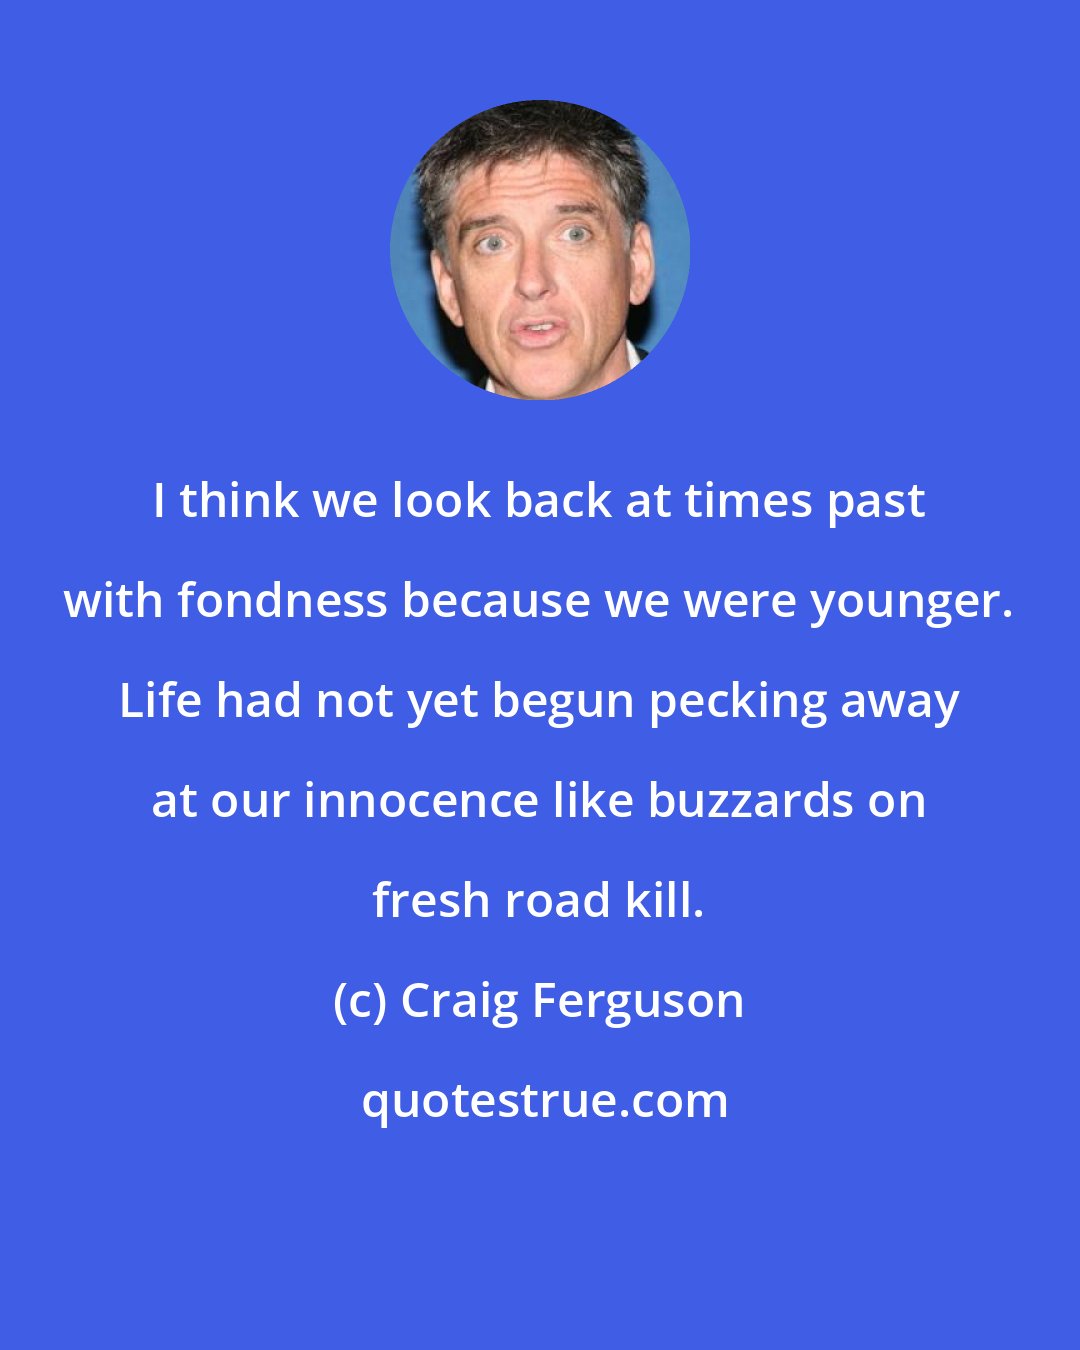 Craig Ferguson: I think we look back at times past with fondness because we were younger. Life had not yet begun pecking away at our innocence like buzzards on fresh road kill.